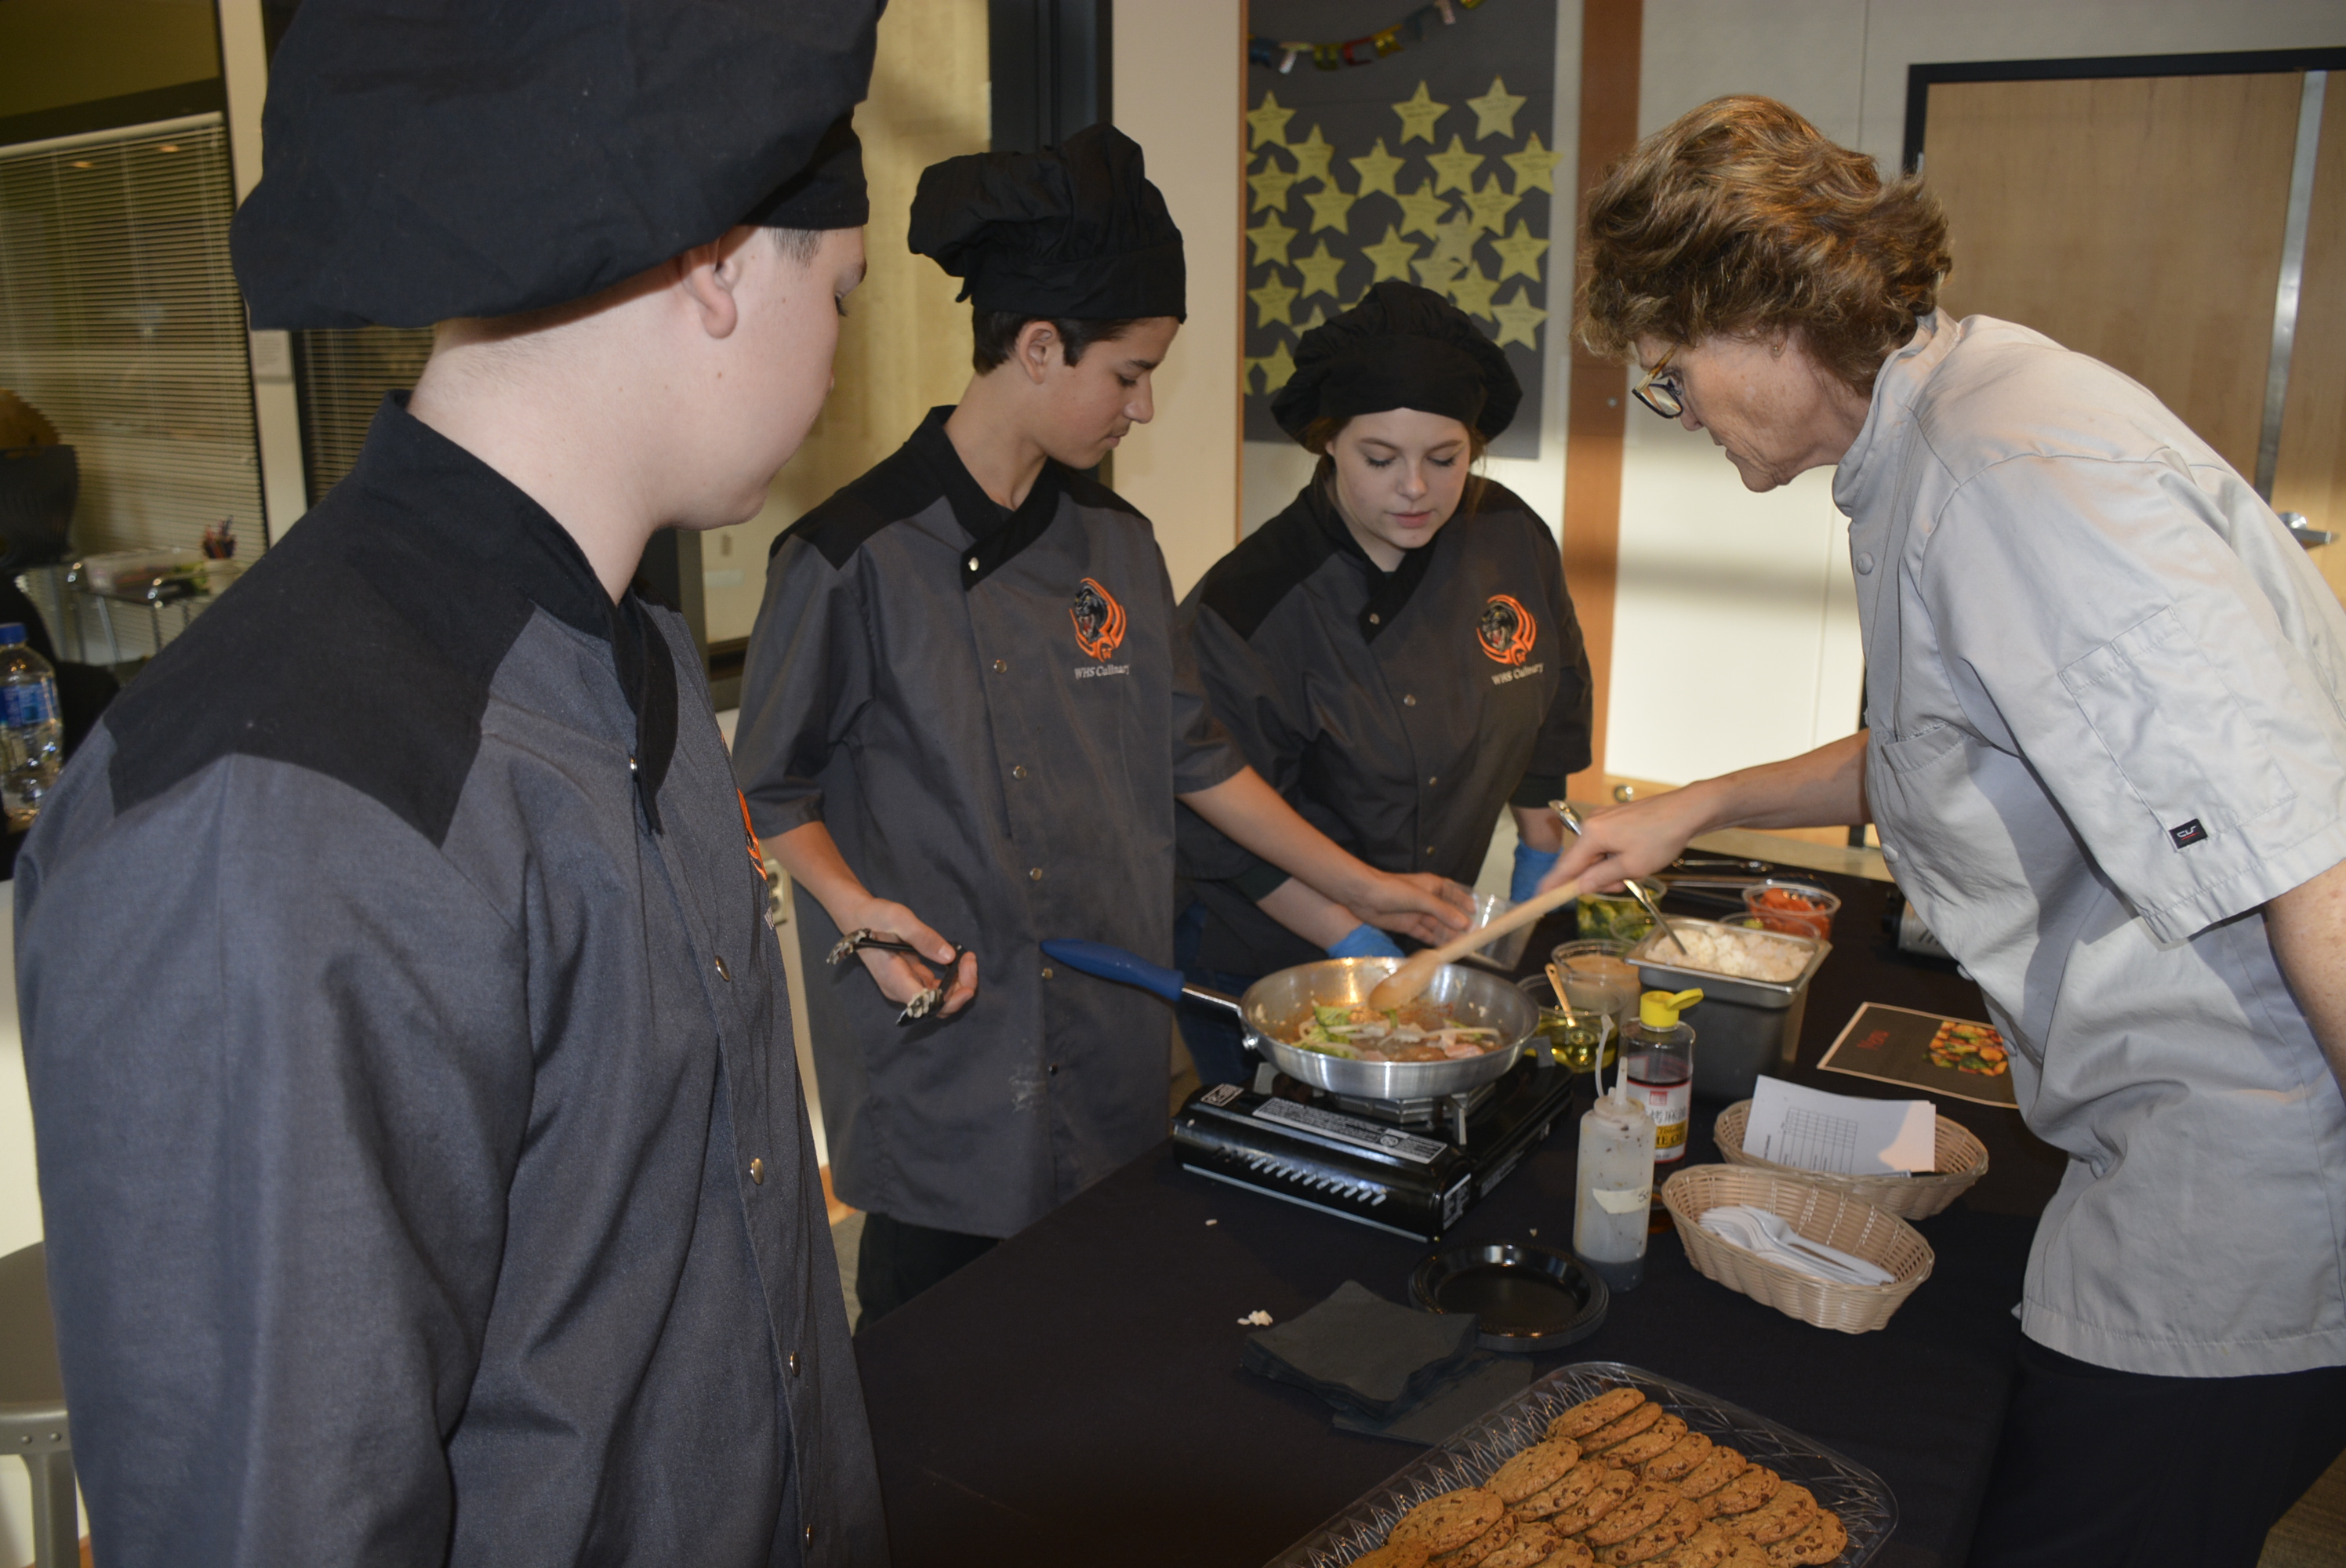 Brenda and three students in front of a table where student is preparing food as part of their culinary final